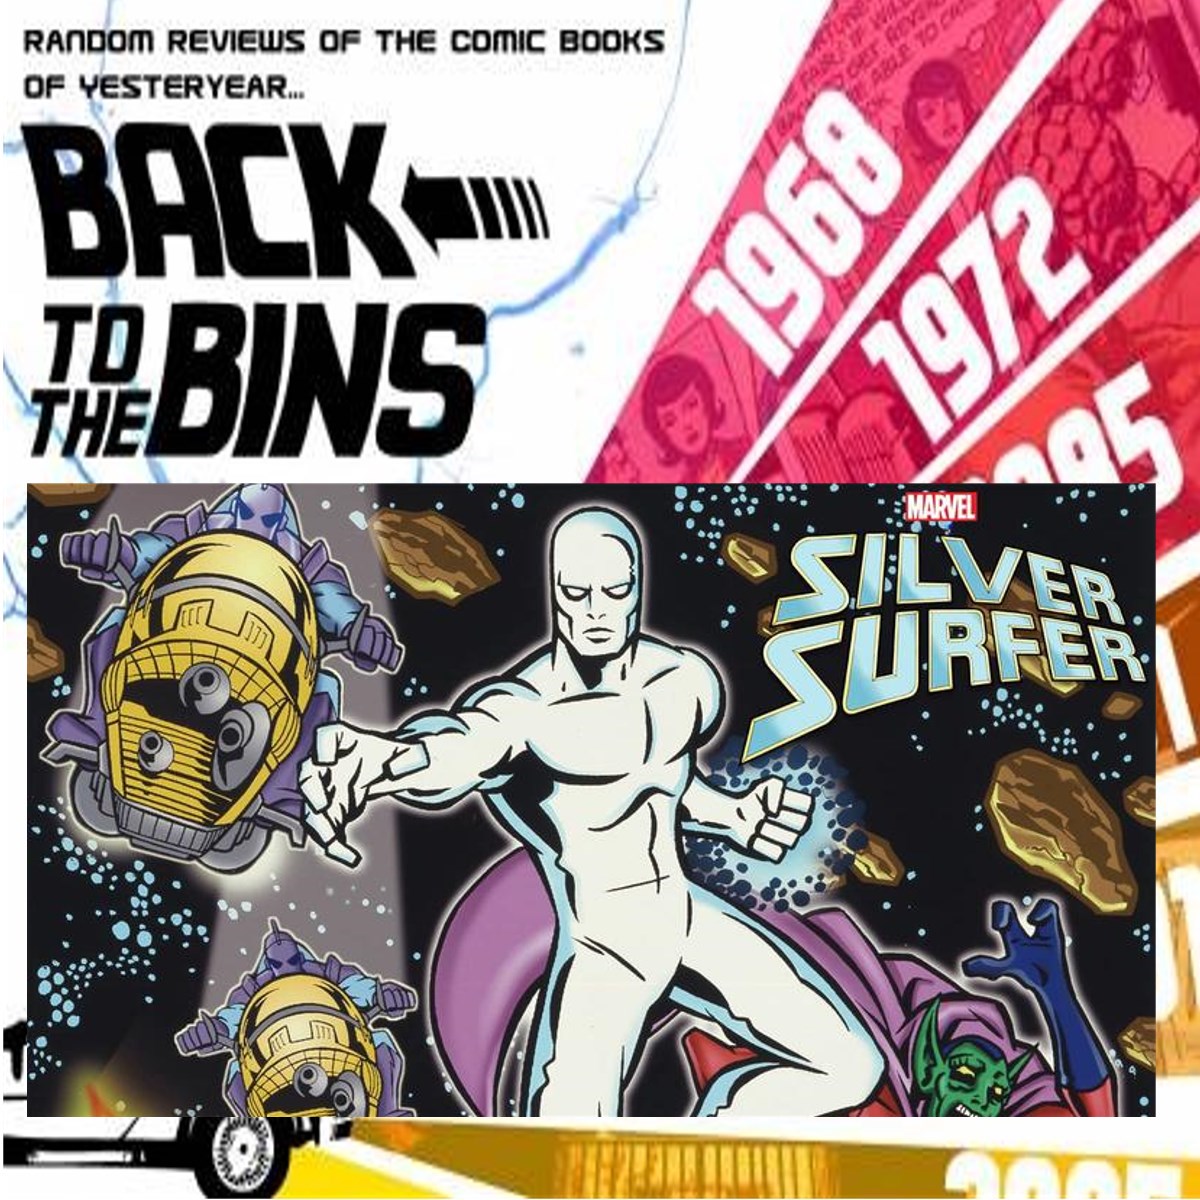 Back to the Bins #487 – Silver Surfer Cartoon Review – Two True Freaks